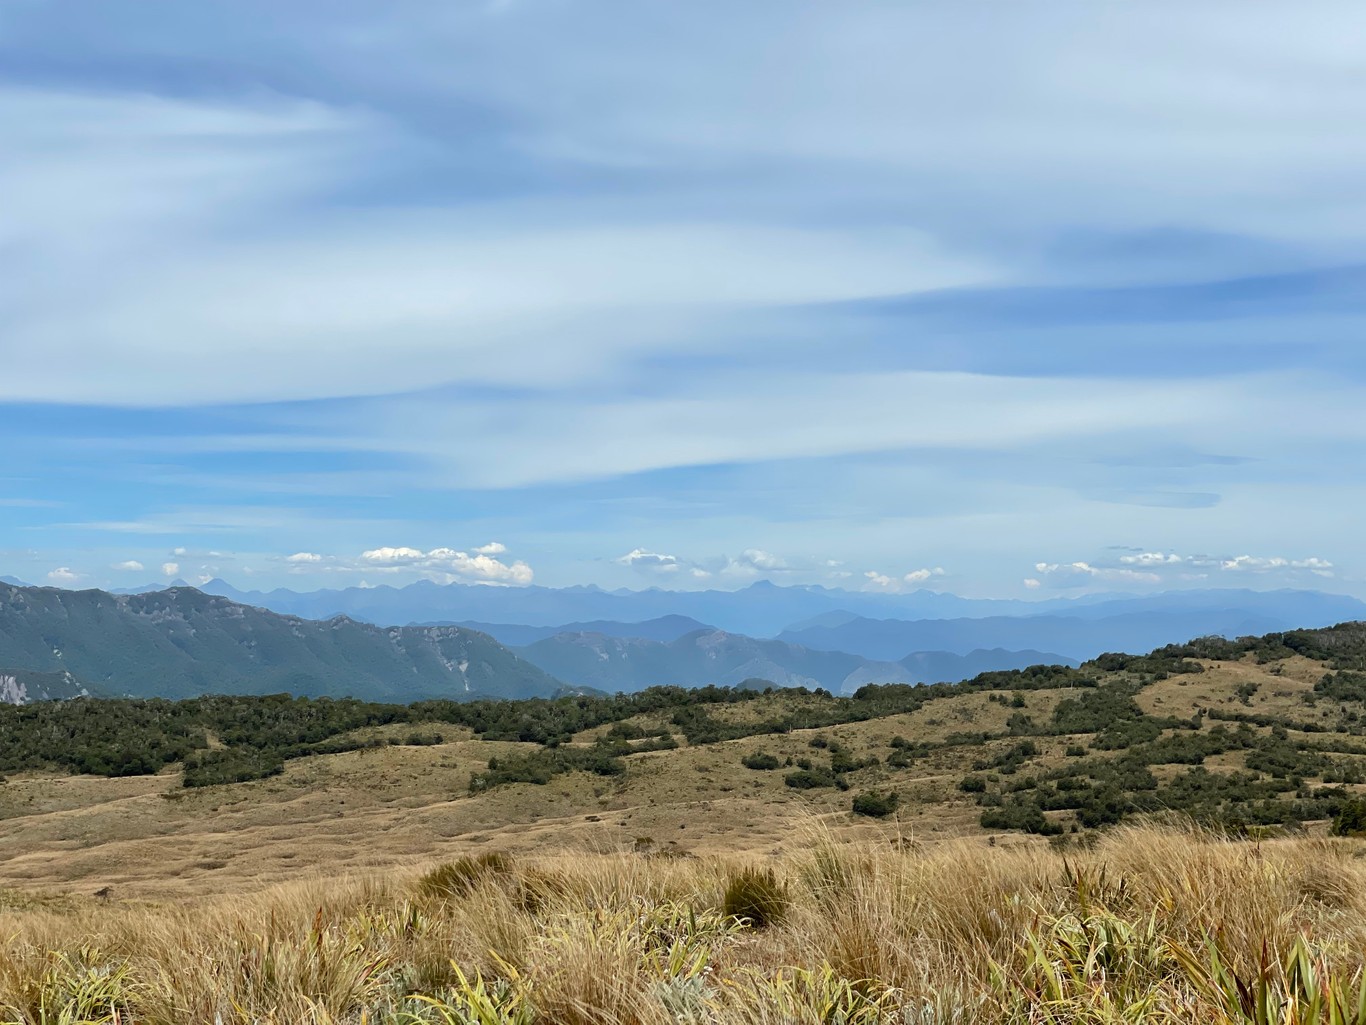 A tussock-covered plateau with multiple ridges receding into the distance